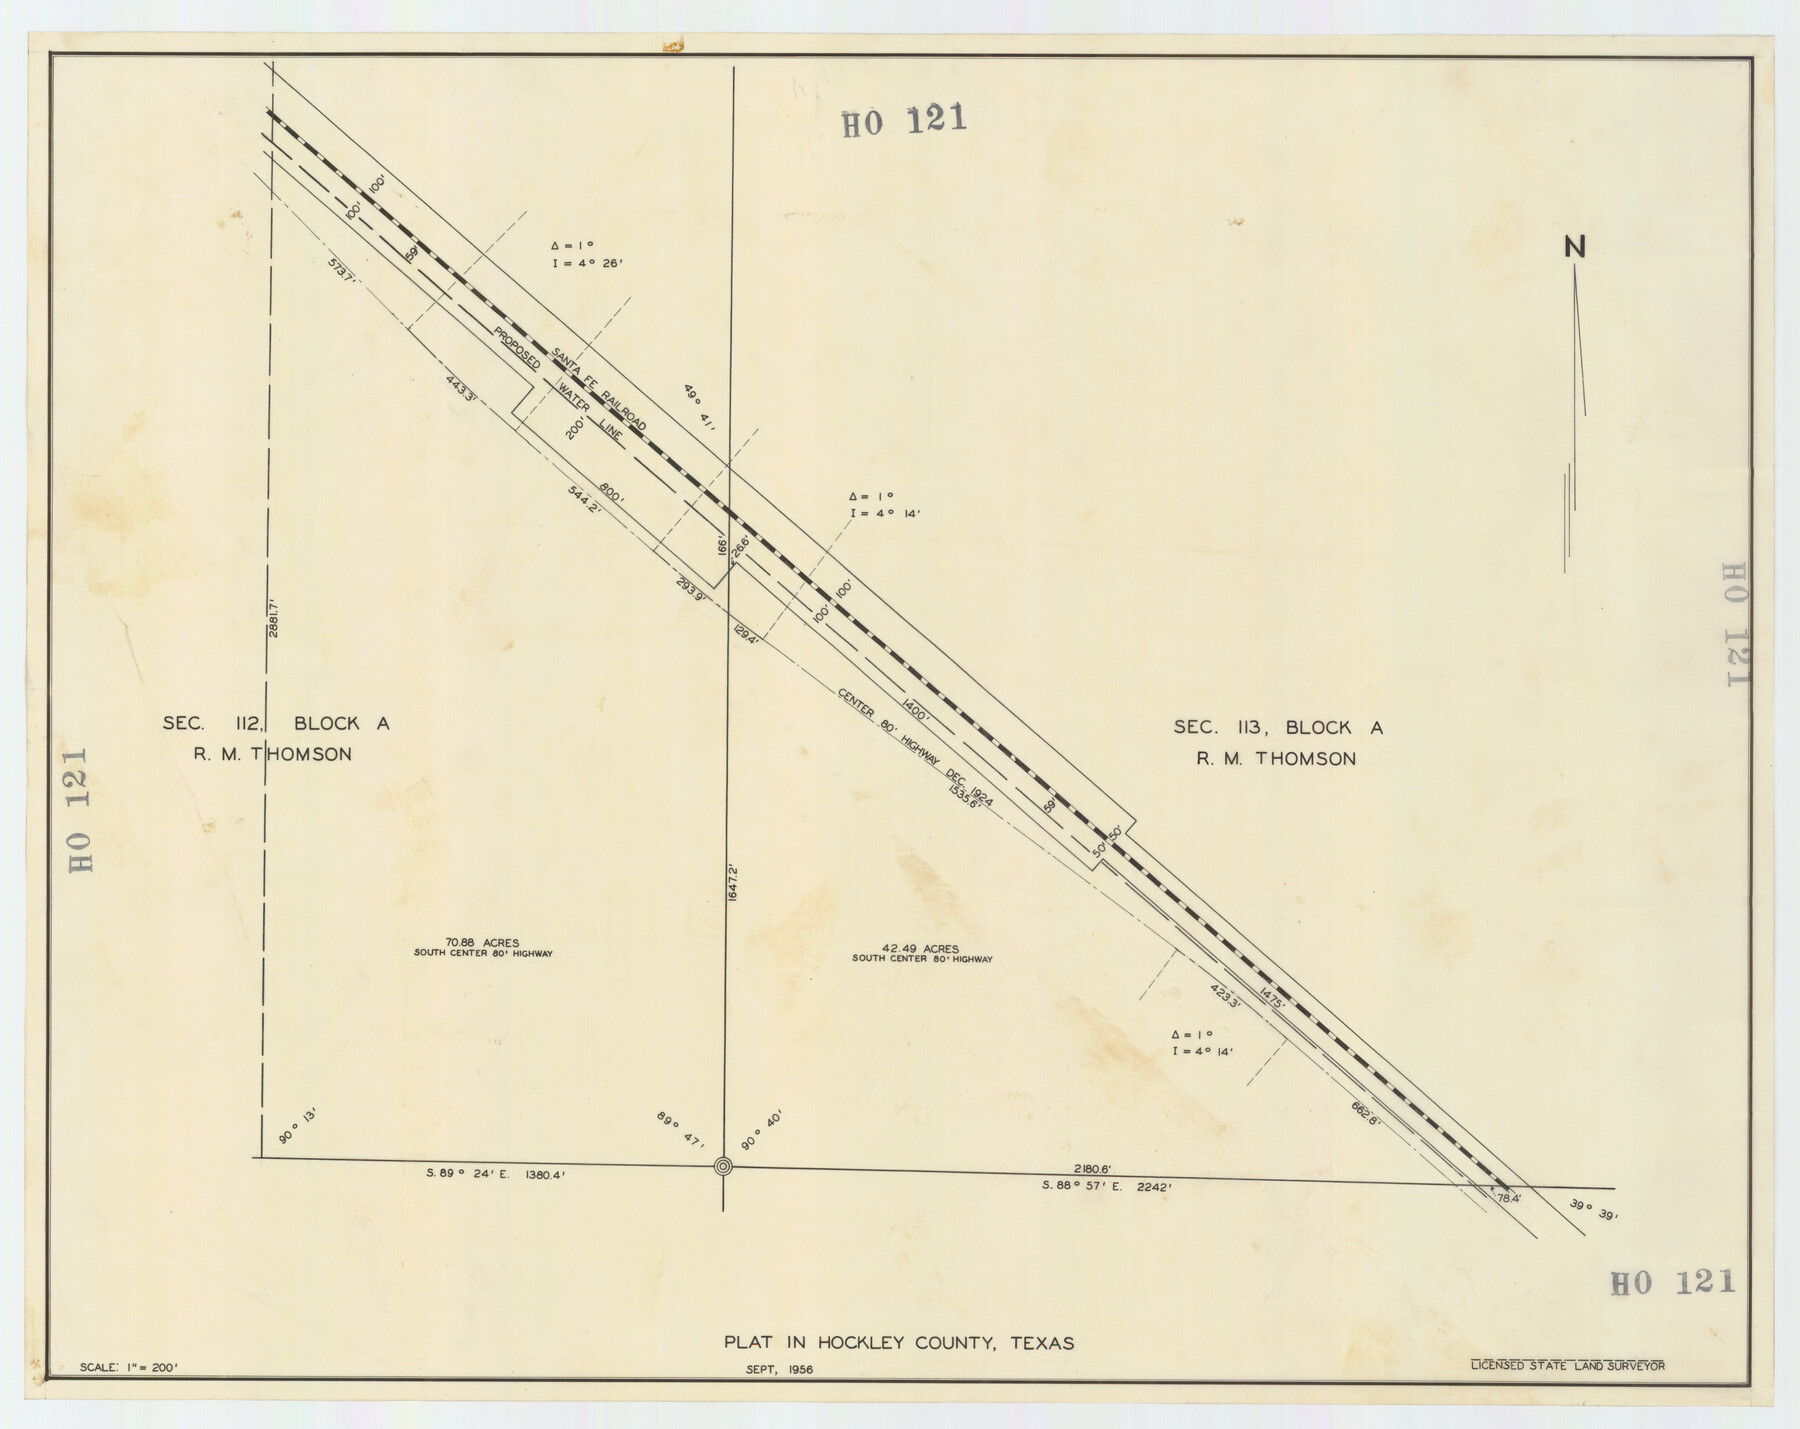 92221, Plat in Hockley County, Texas, Twichell Survey Records